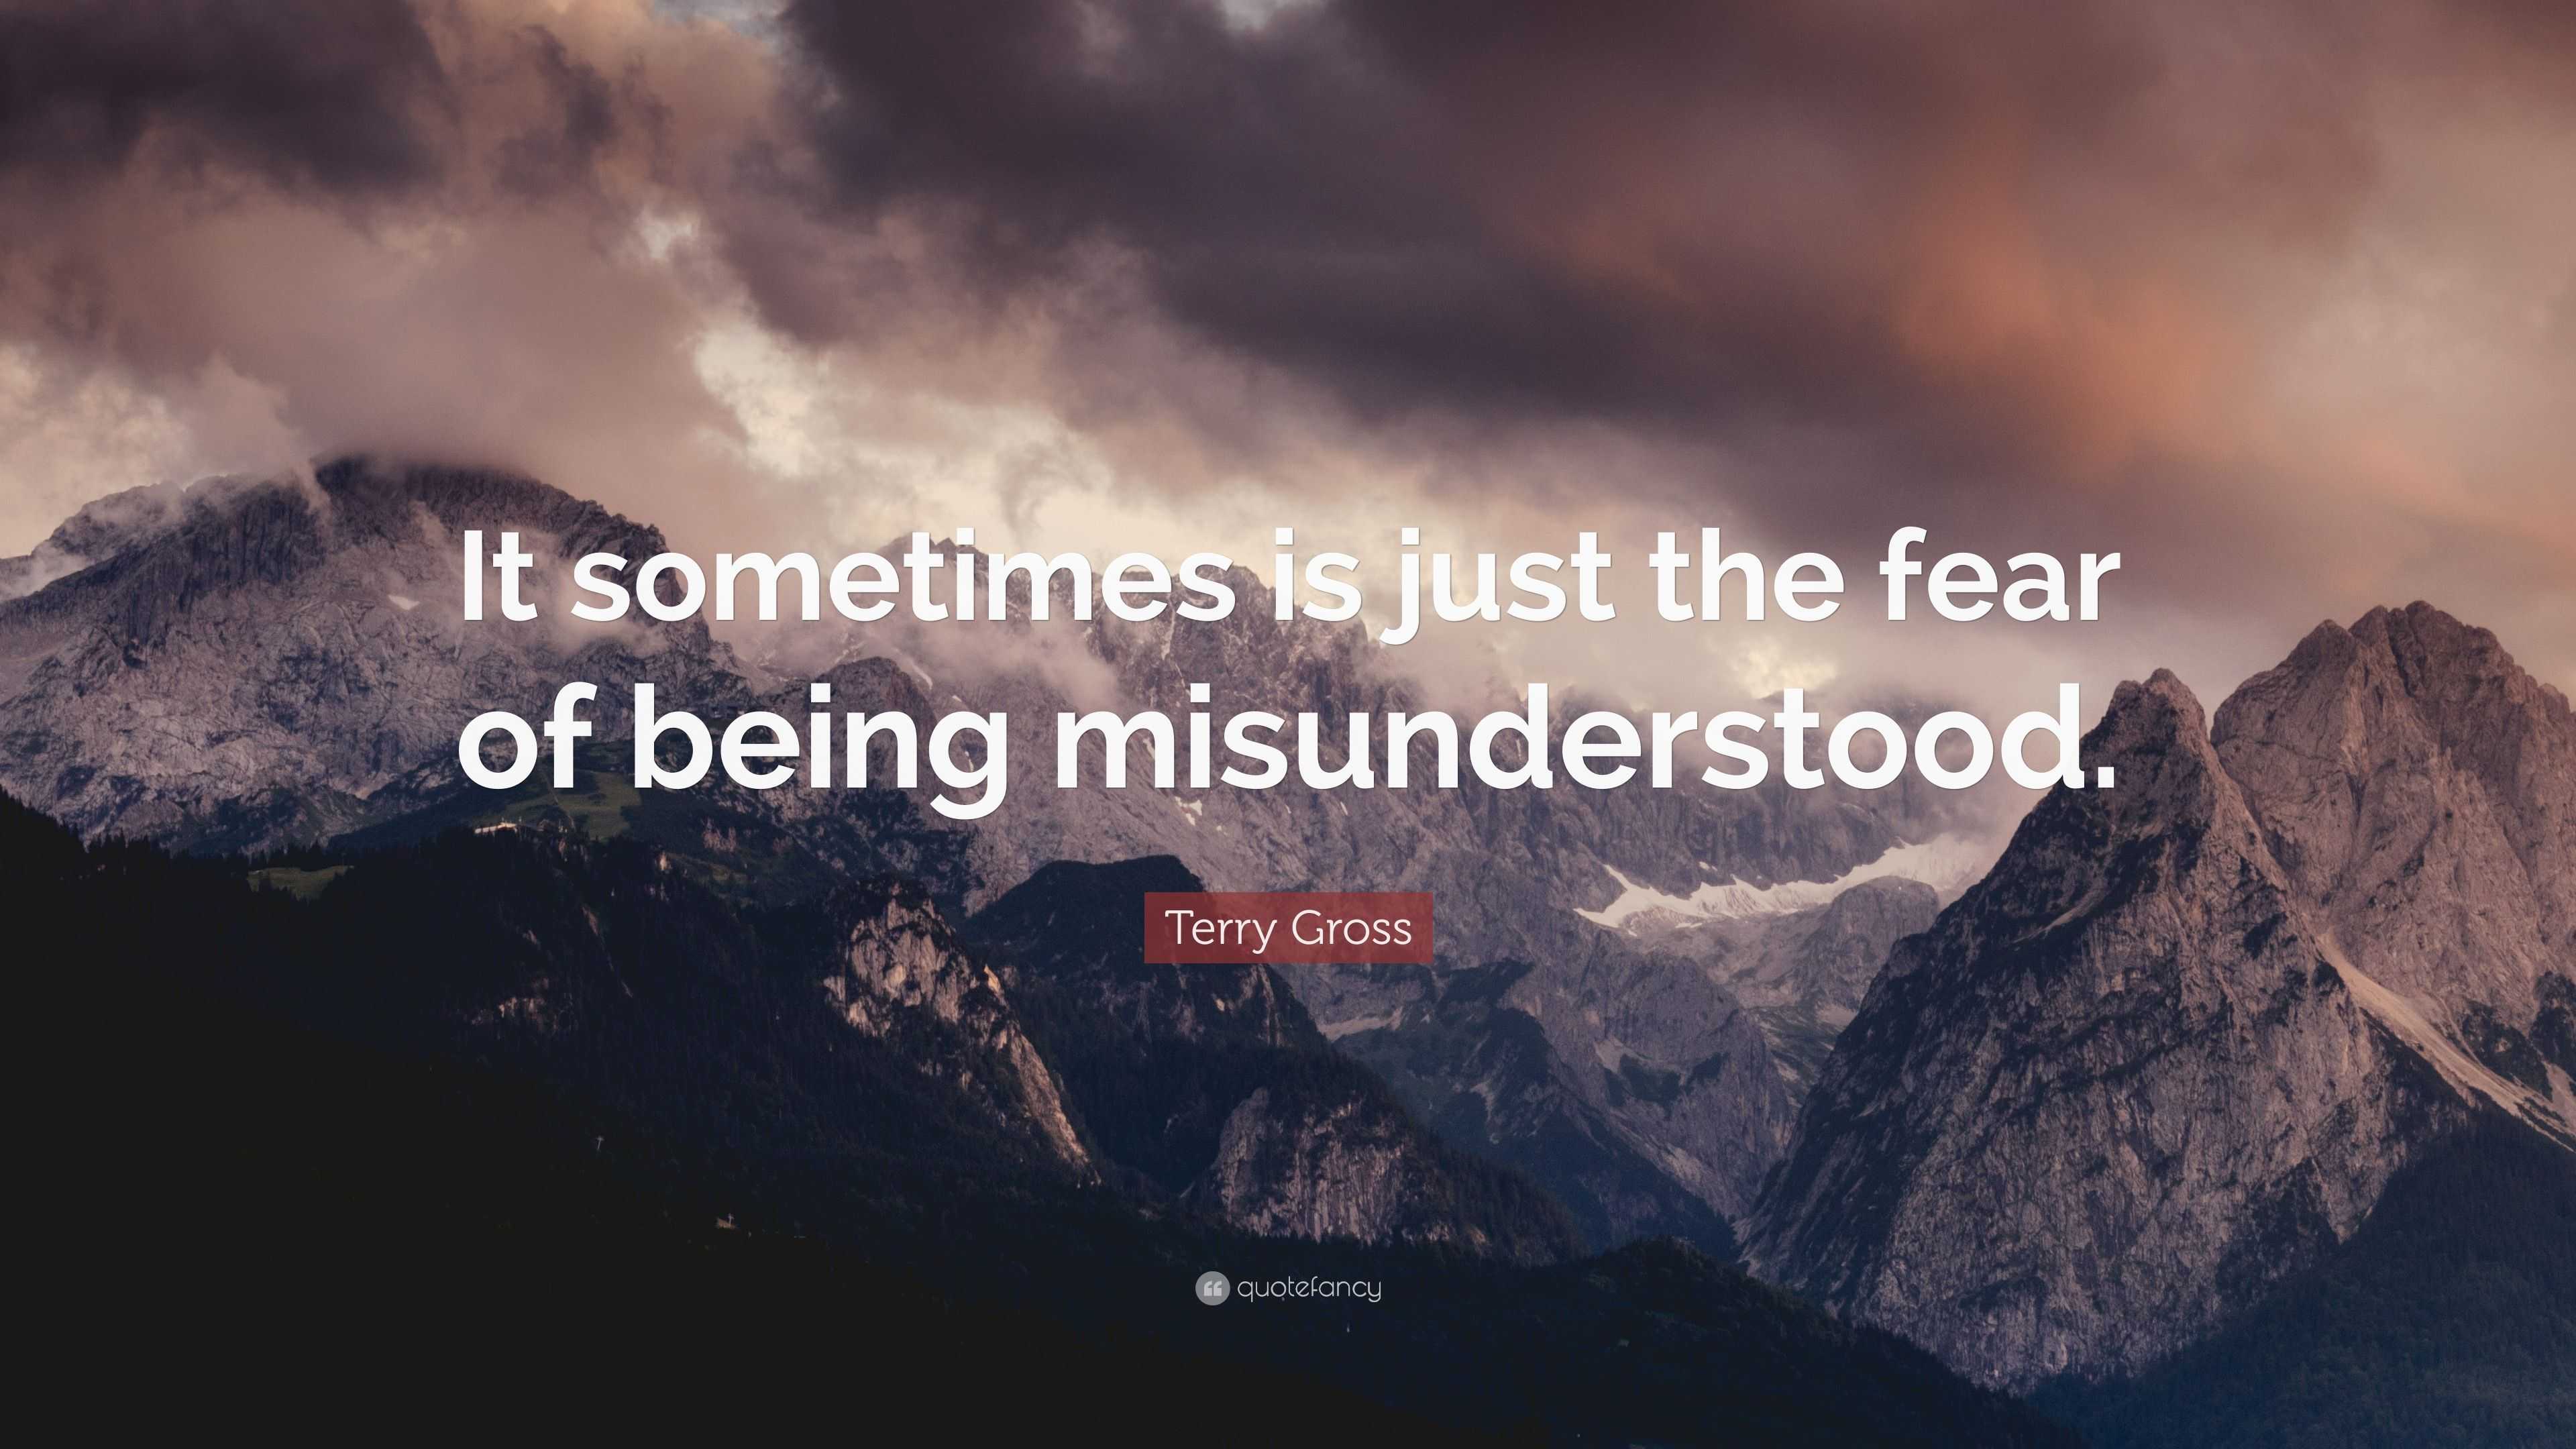 Terry Gross Quote: “It sometimes is just the fear of being misunderstood.”